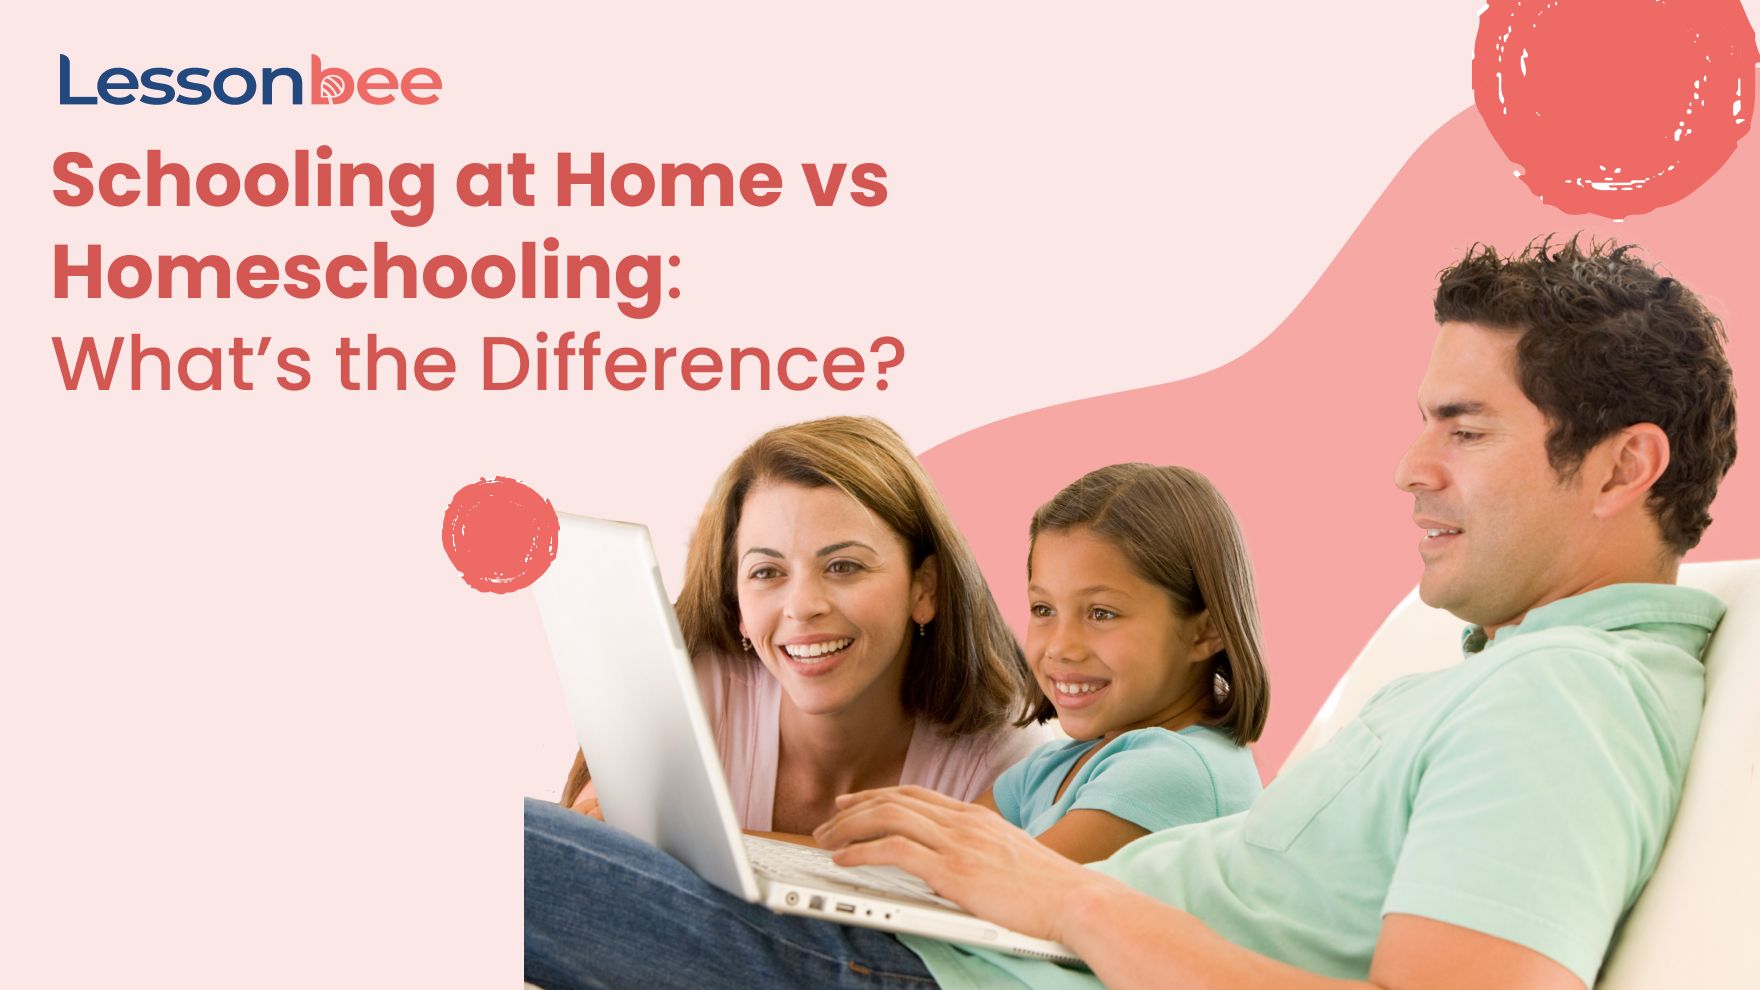 Schooling-at-Home-vs-Homeschooling_--What-s-the-Difference_